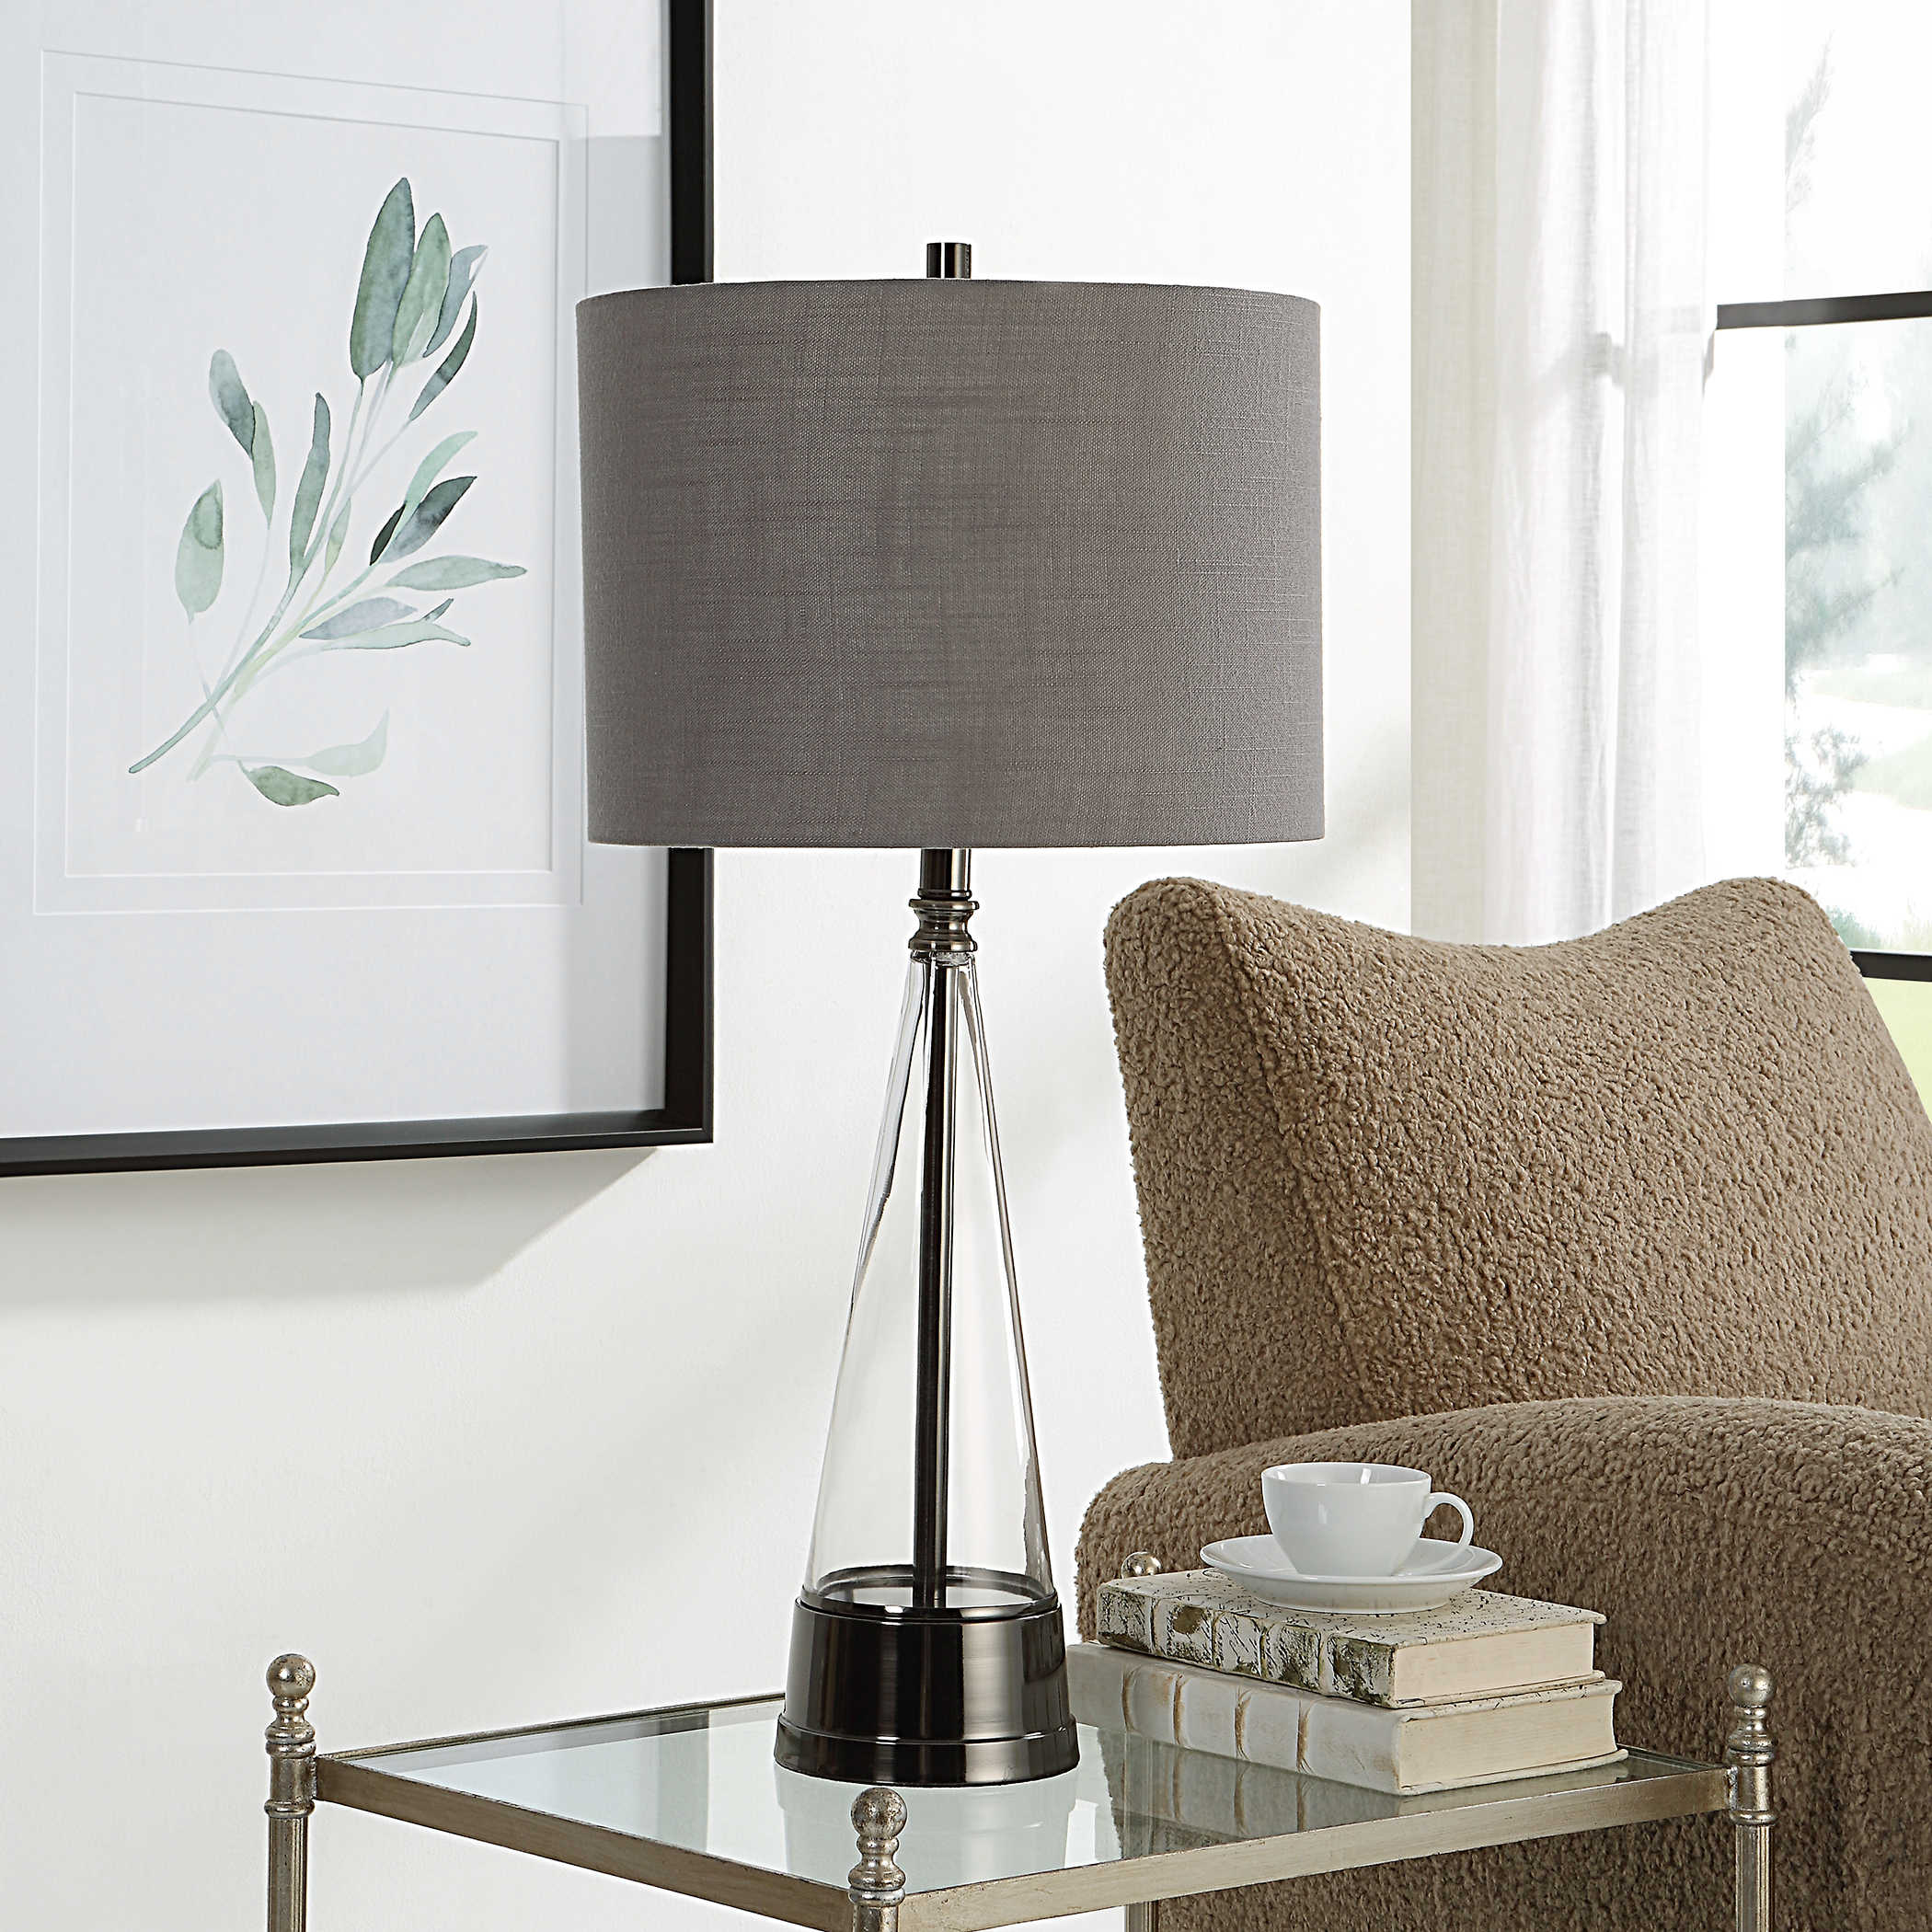 Contemporary Style Cone Shaped Table Lamp Uttermost